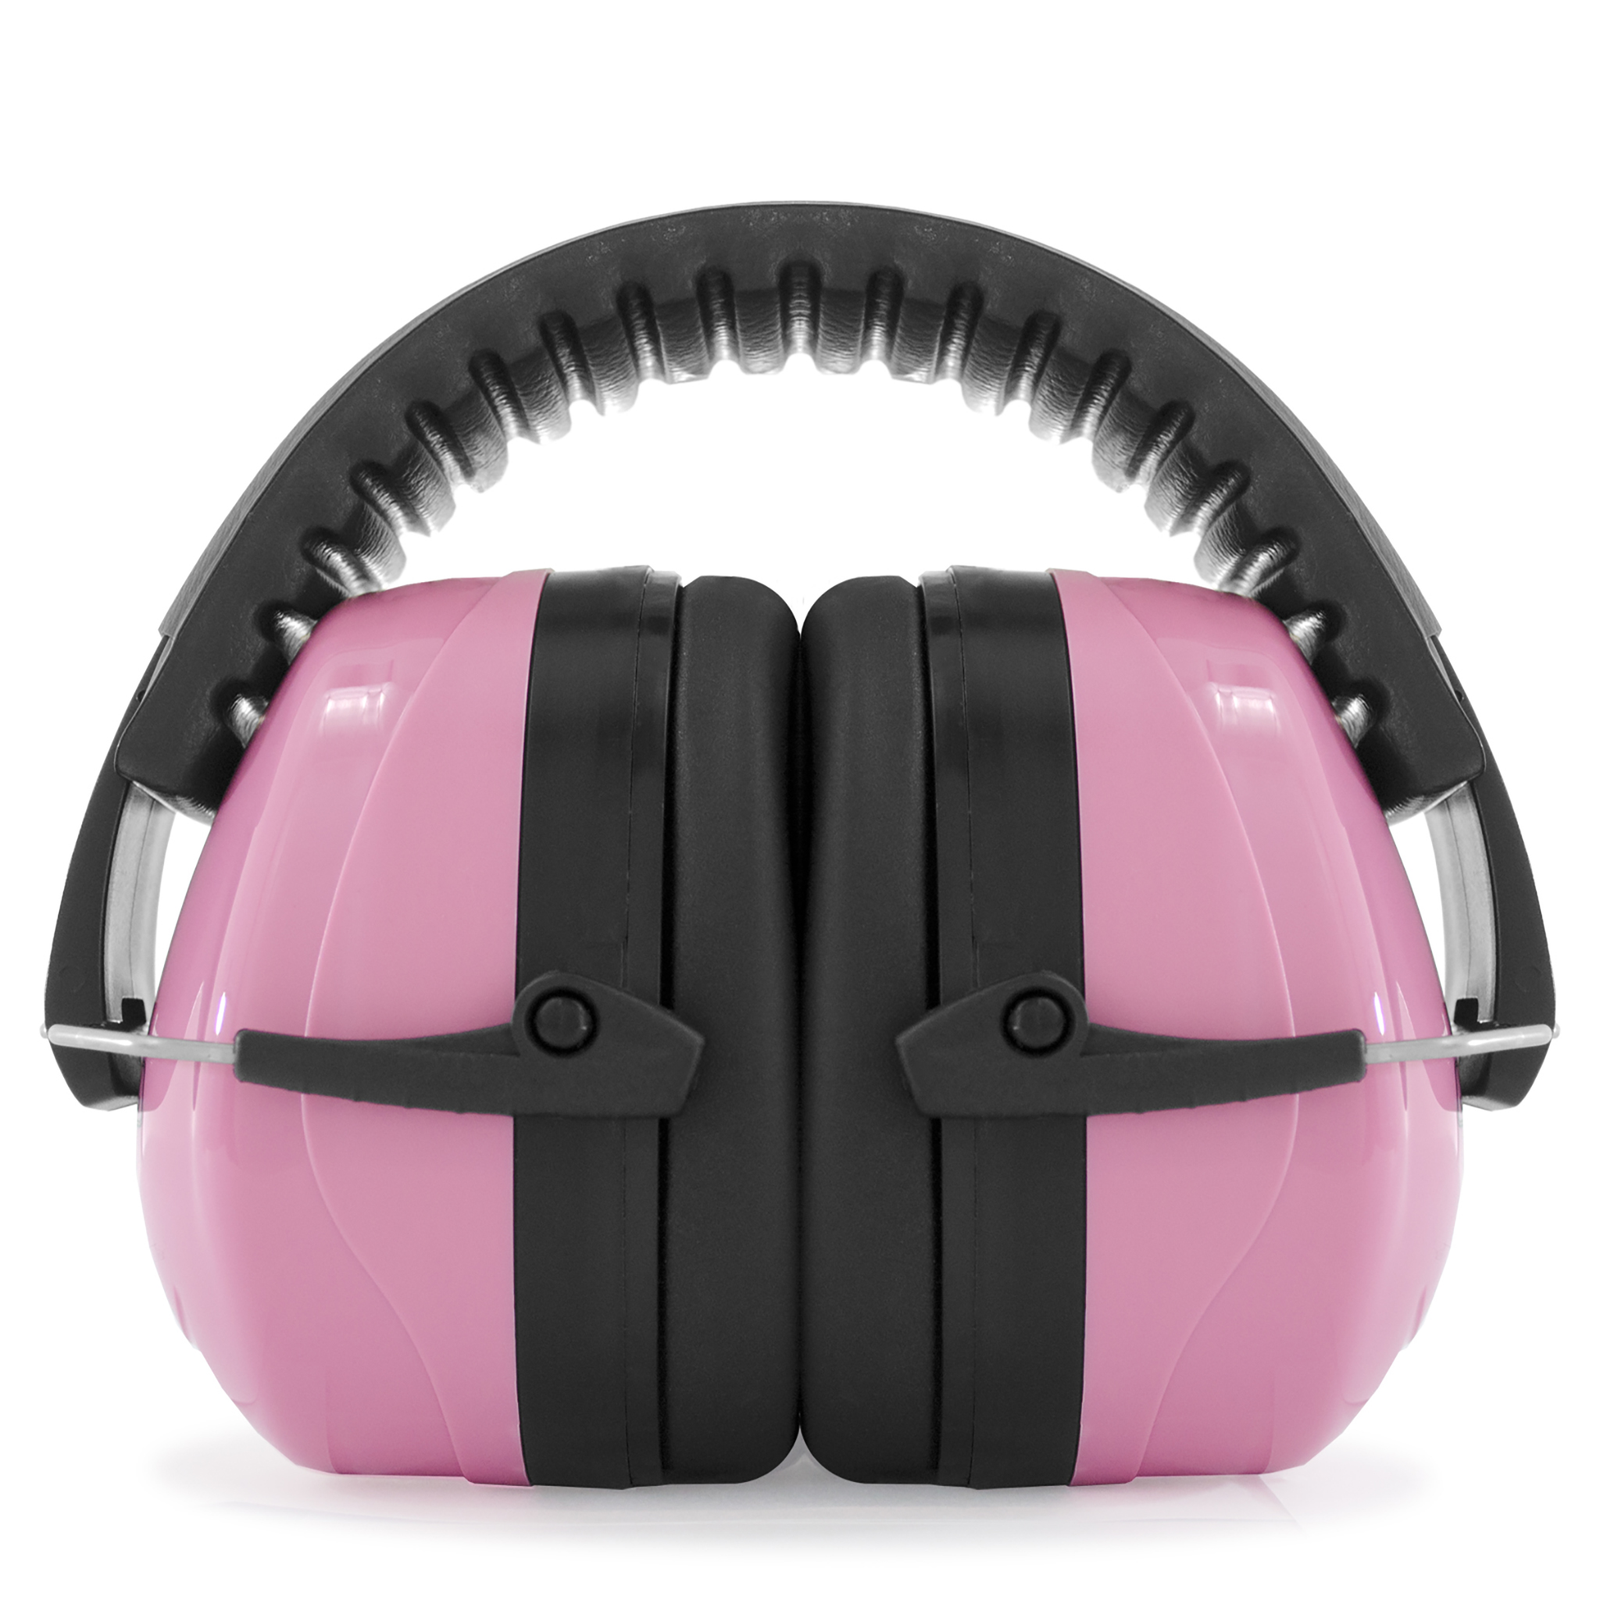 Front view of the 27DB NRR NOISE CANCELLING HEARING PROTECTION EARMUFFS